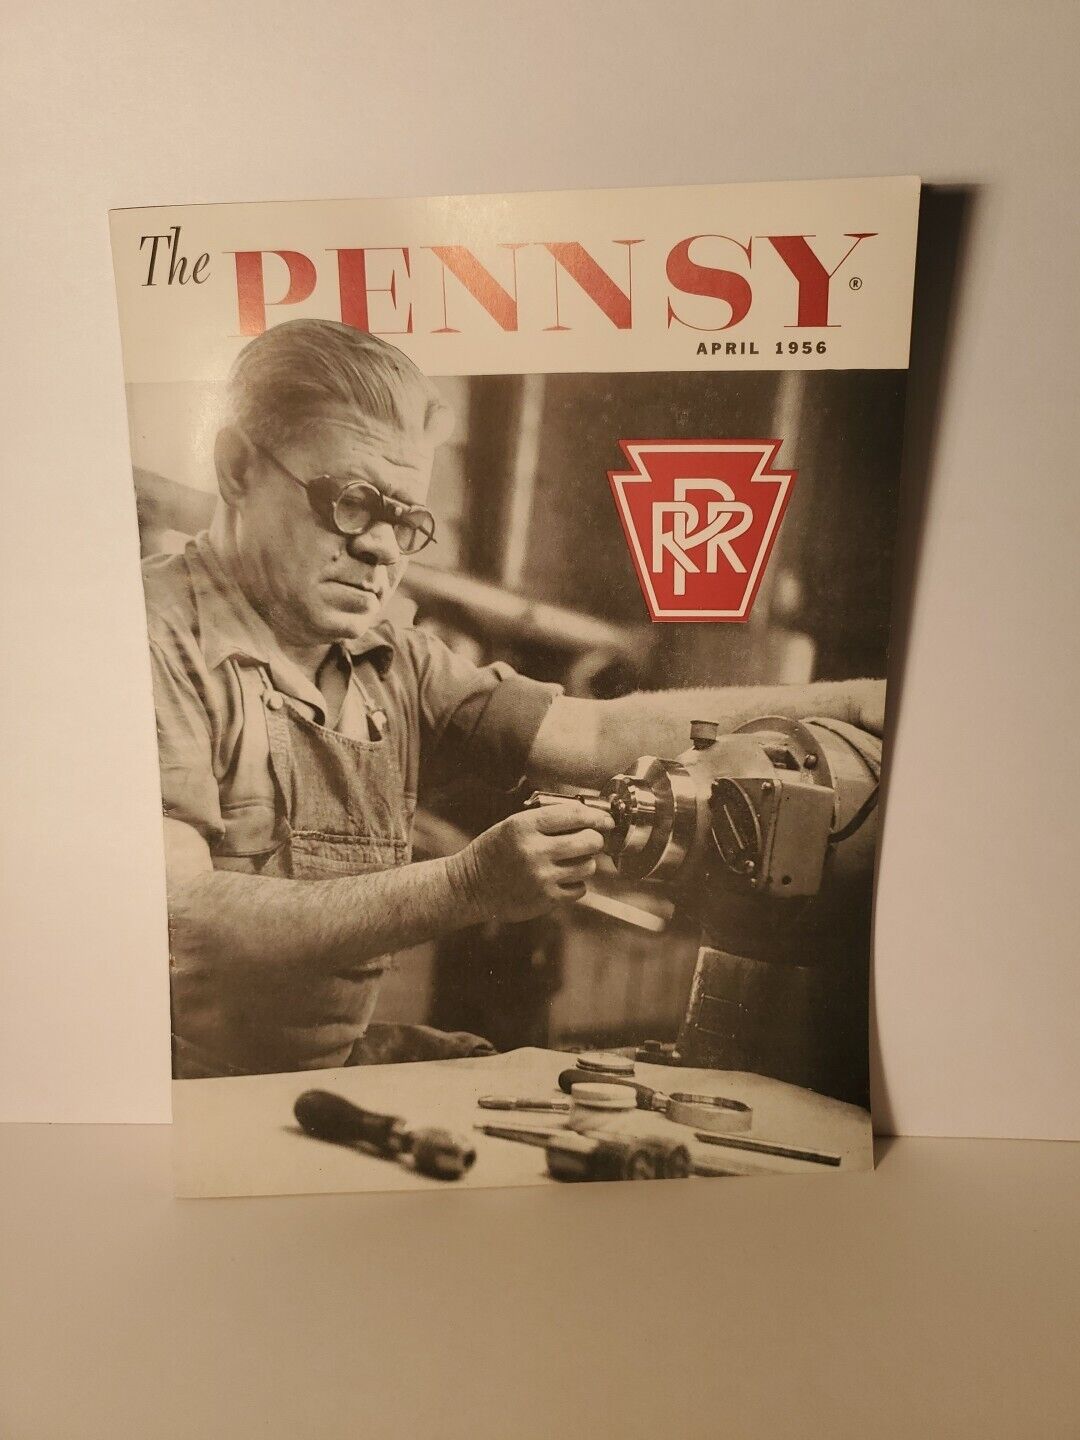 The Pennsy April 1956